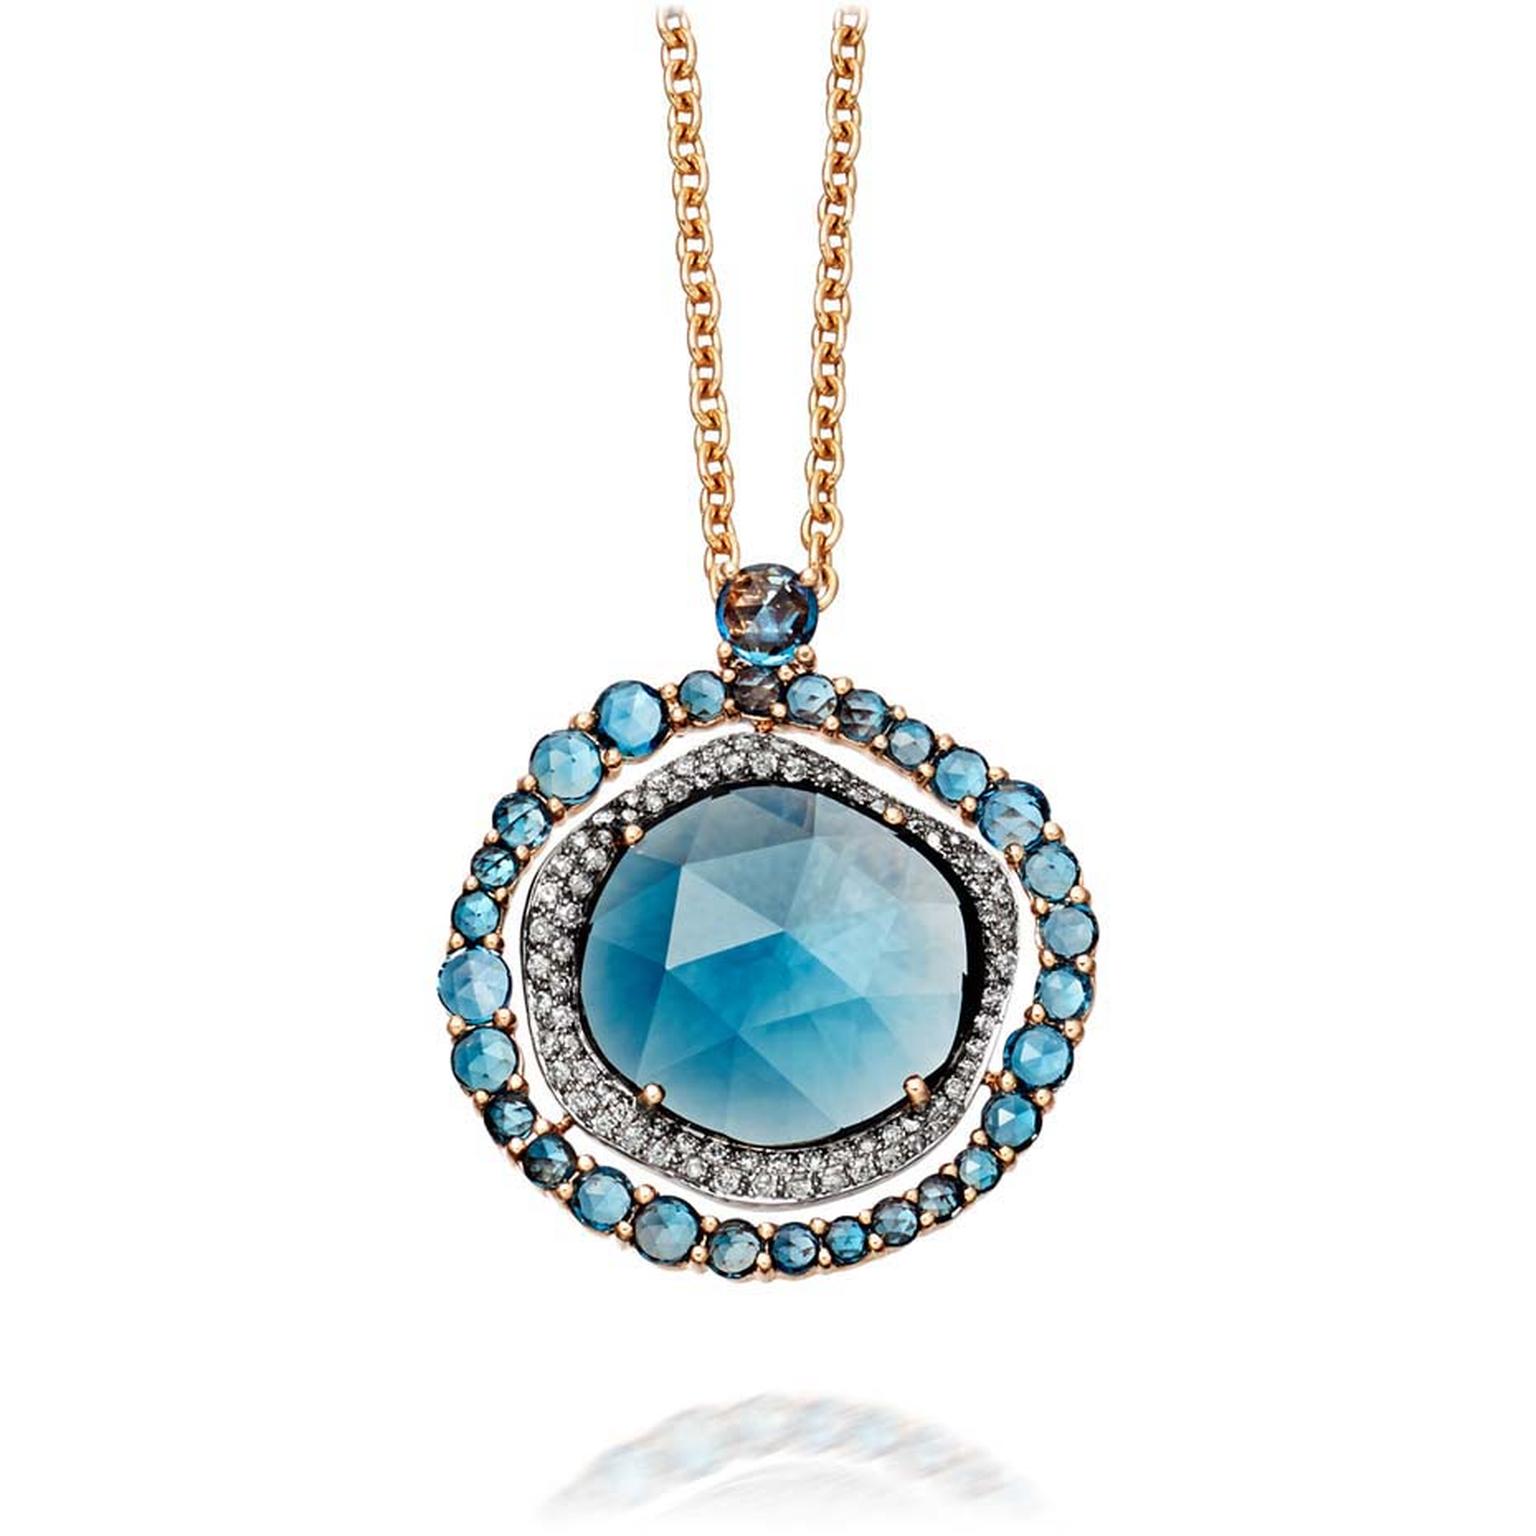 Astley Clarke FAO necklace with a 12.50ct rose-cut London blue topaz surrounded by molten pavé grey diamonds (£5,950).